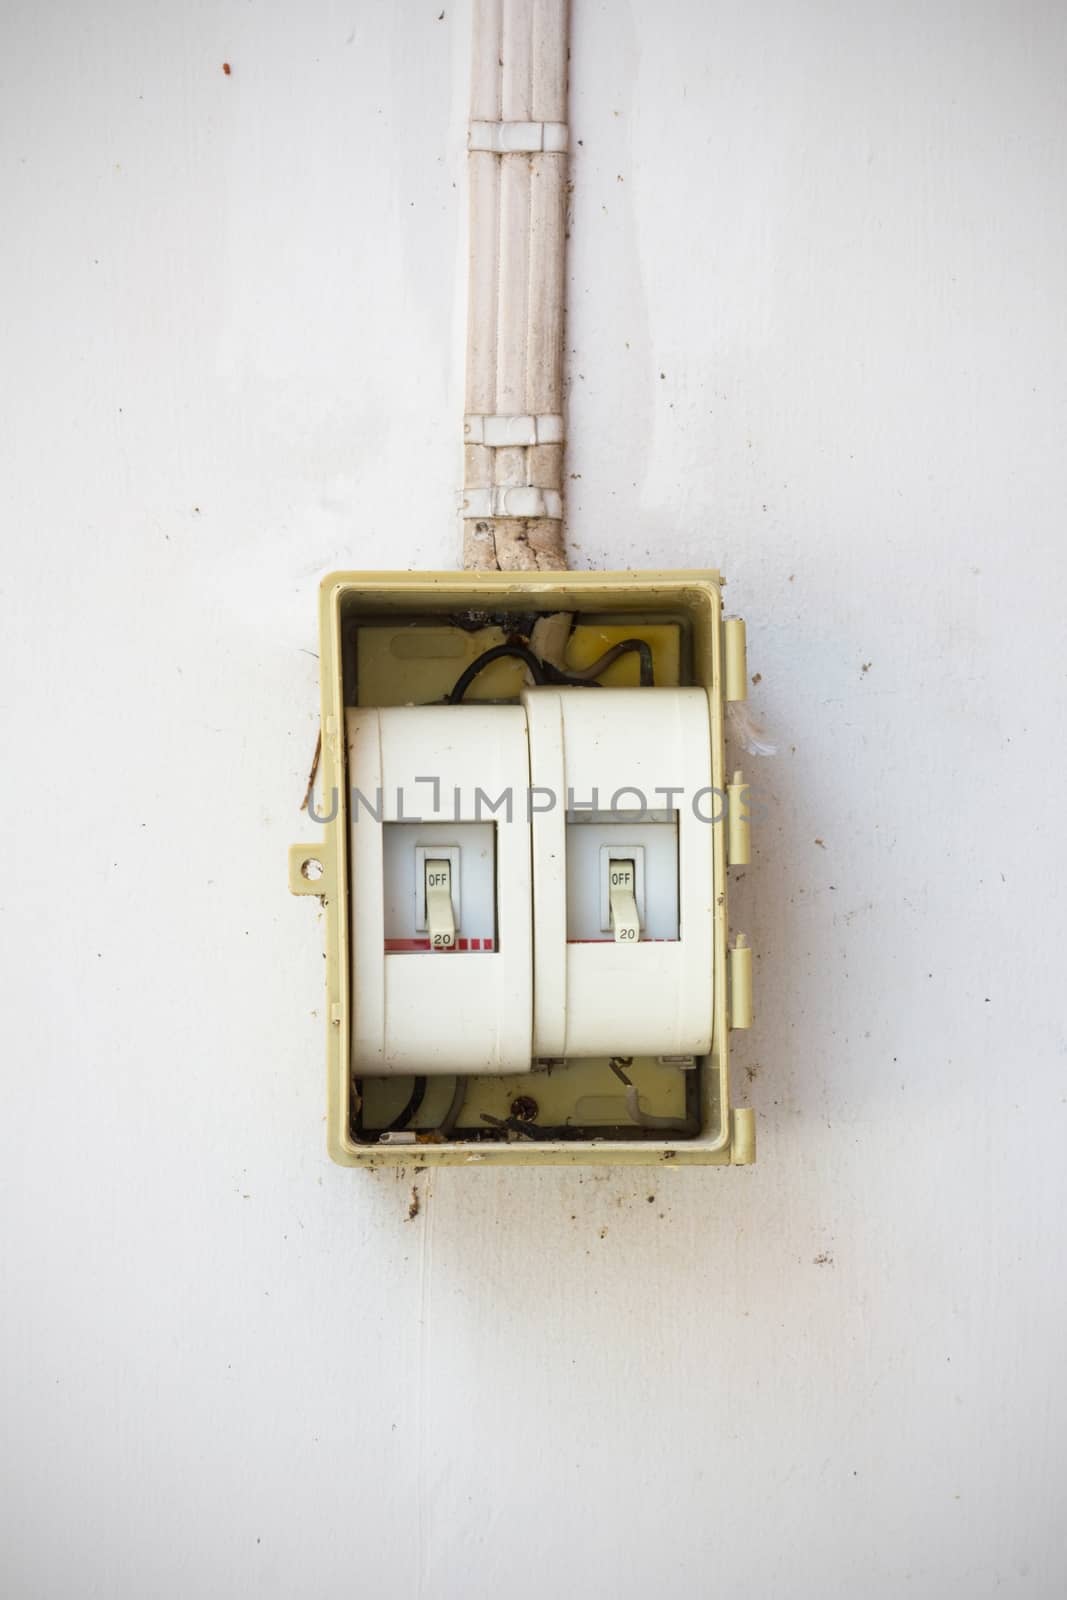 old light switch in the Off Position on dirty and old wall by a3701027